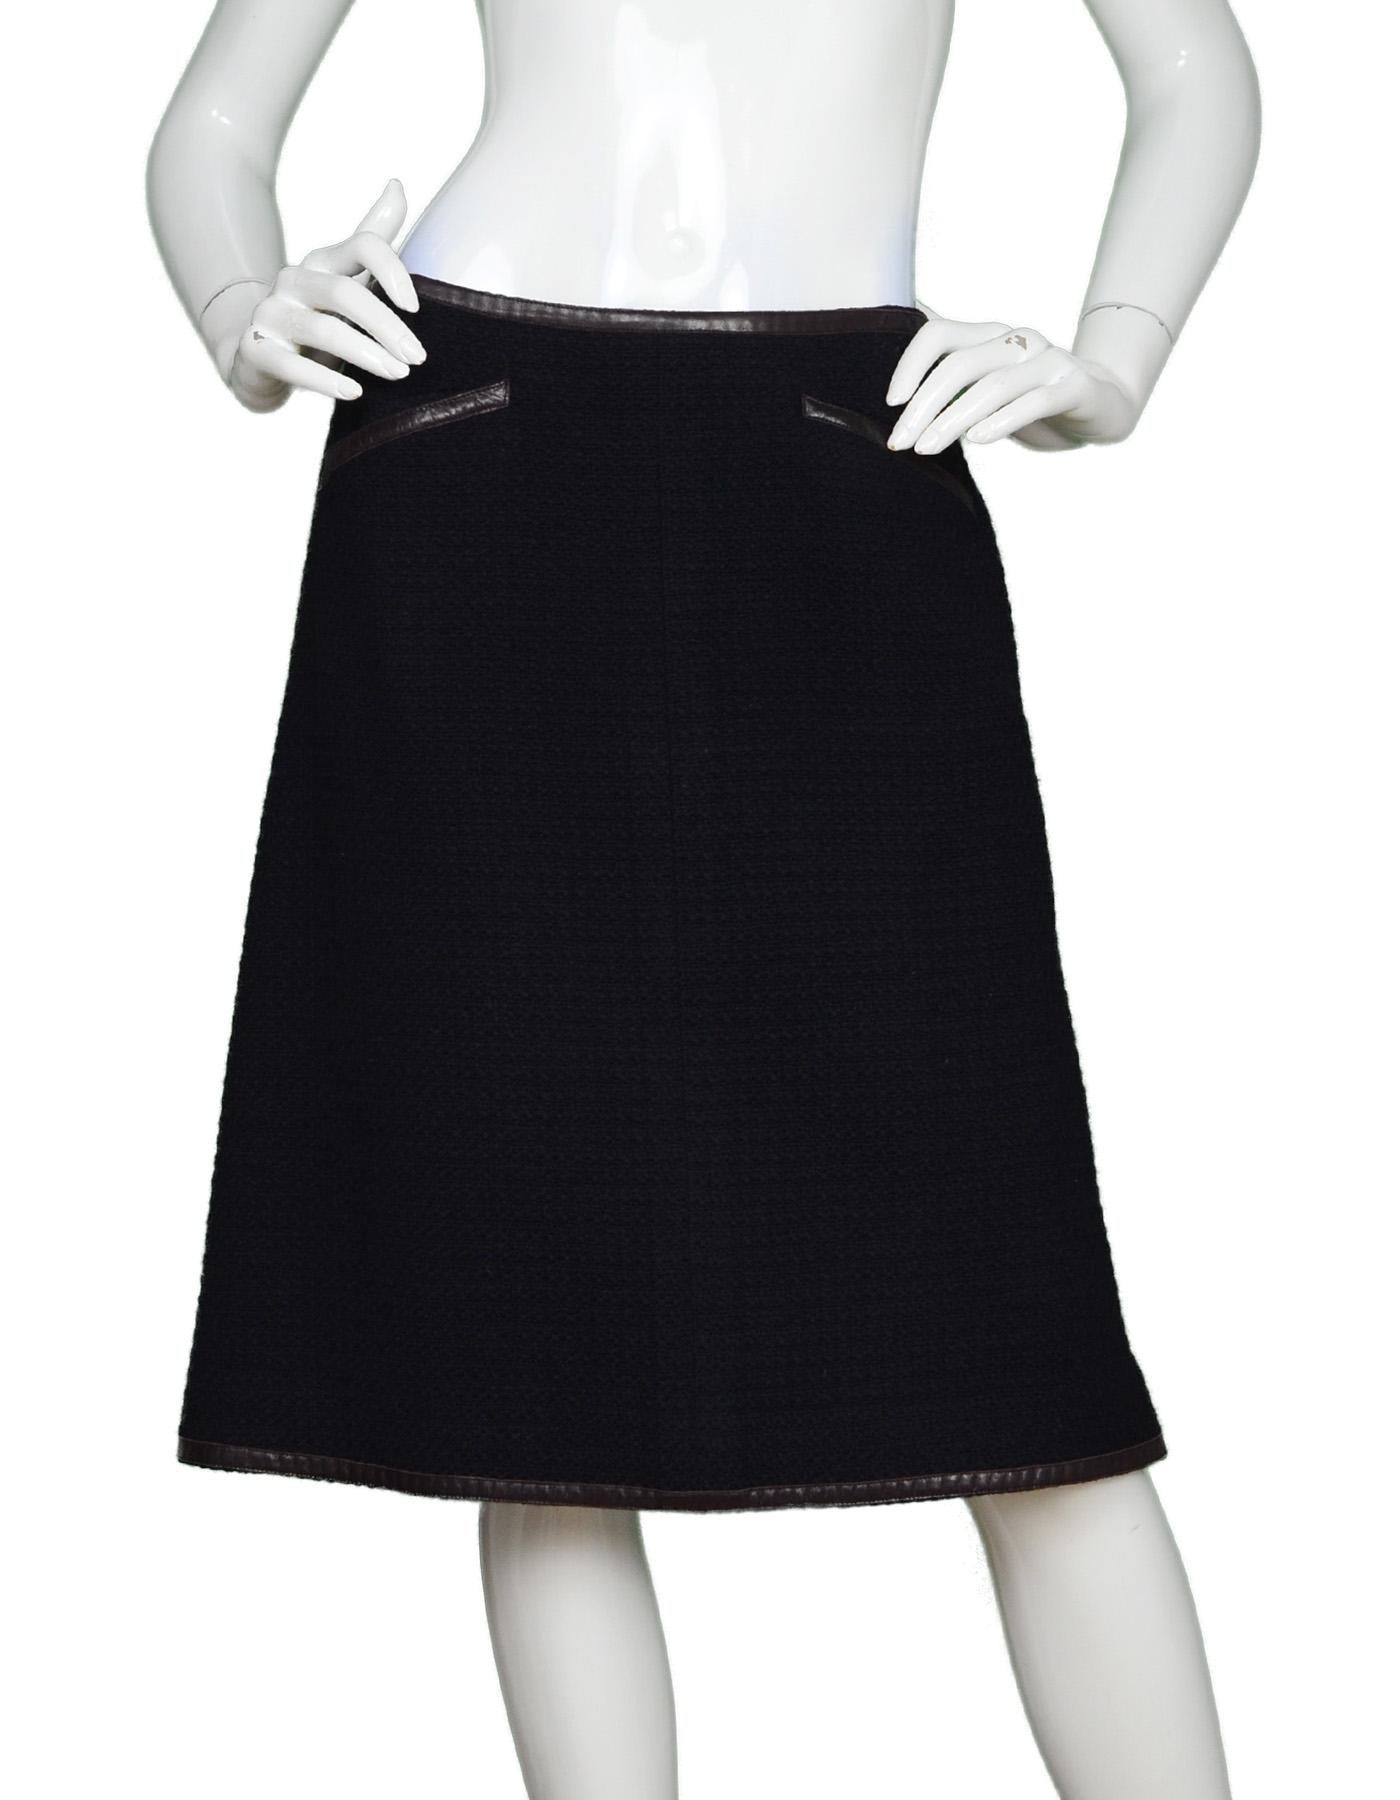 Chanel Black Wool Pencil Skirt W/ Leather Trim Sz 44. Skirt Only, Pictured With Matching Jacket, Item #6527-17.

Made In: France
Color: Black with brown trim
Materials: 100% wool
Lining: 90% silk, 10% spandex
Opening/Closure: Hidden back zip with